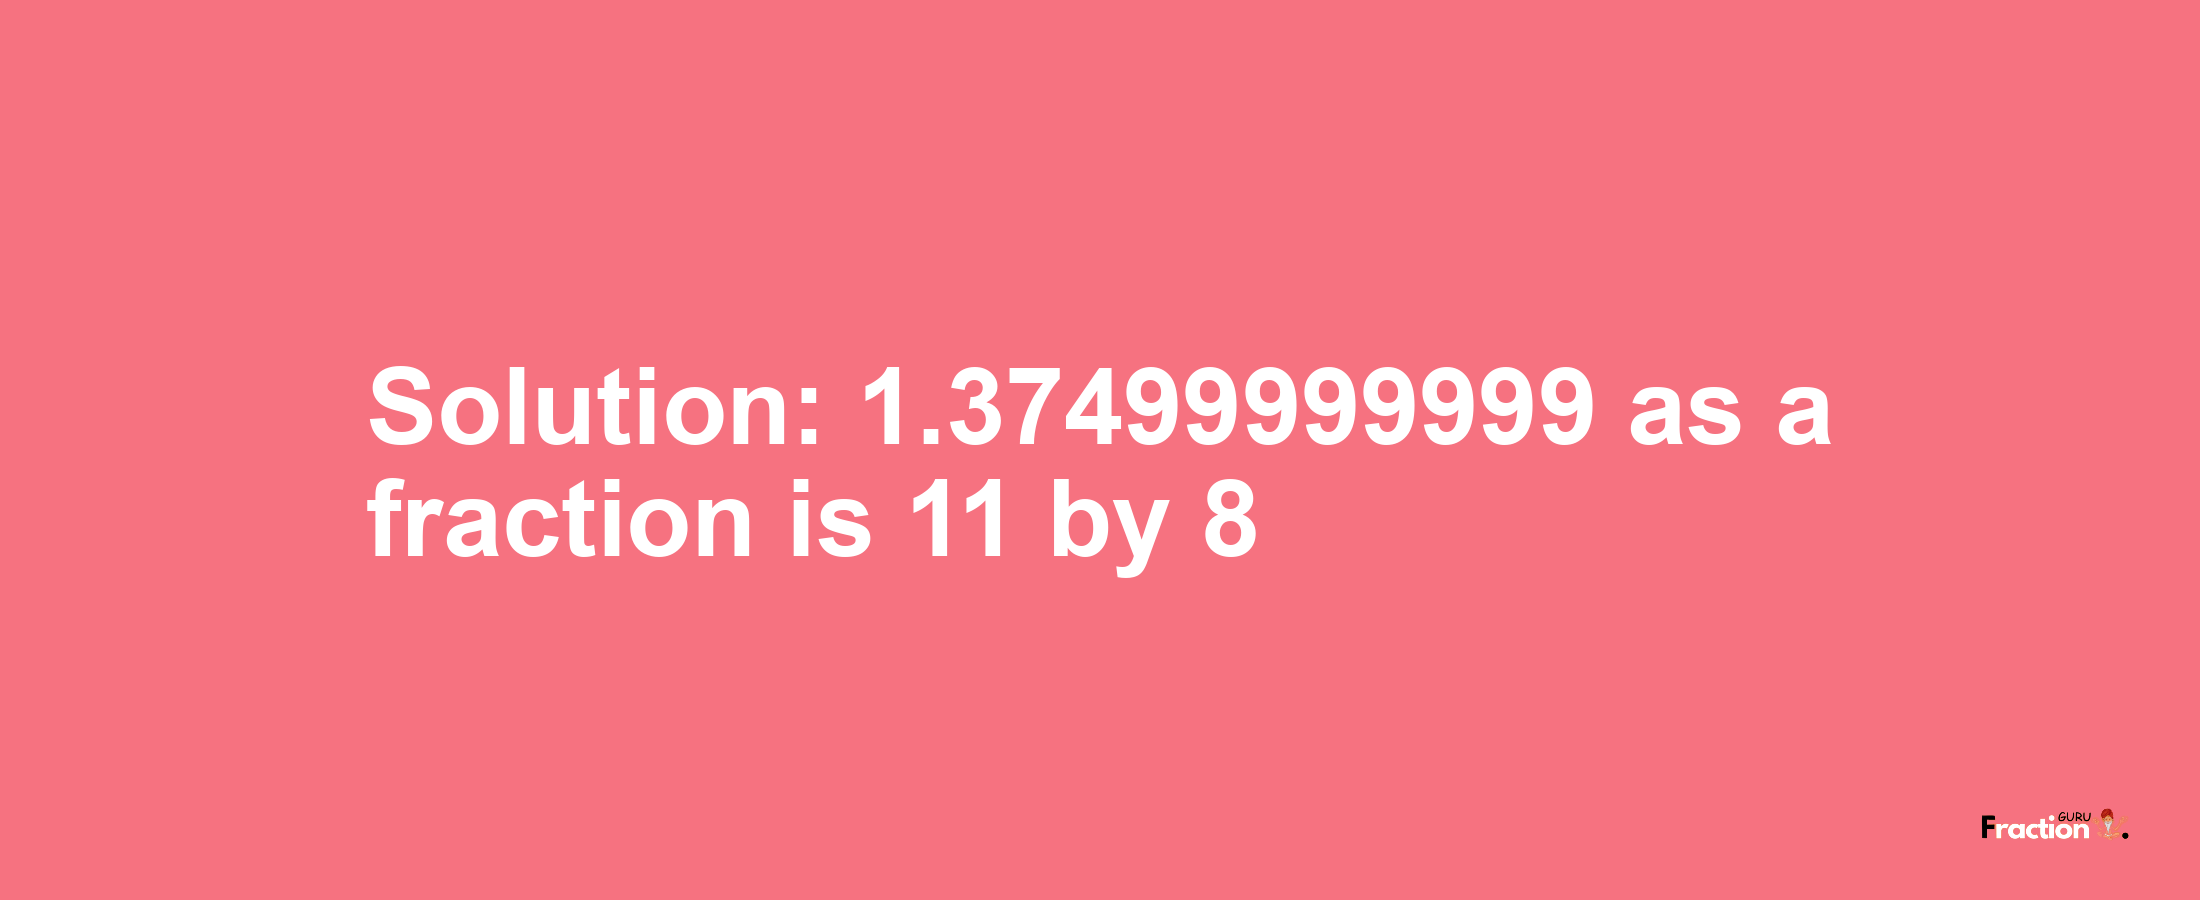 Solution:1.37499999999 as a fraction is 11/8